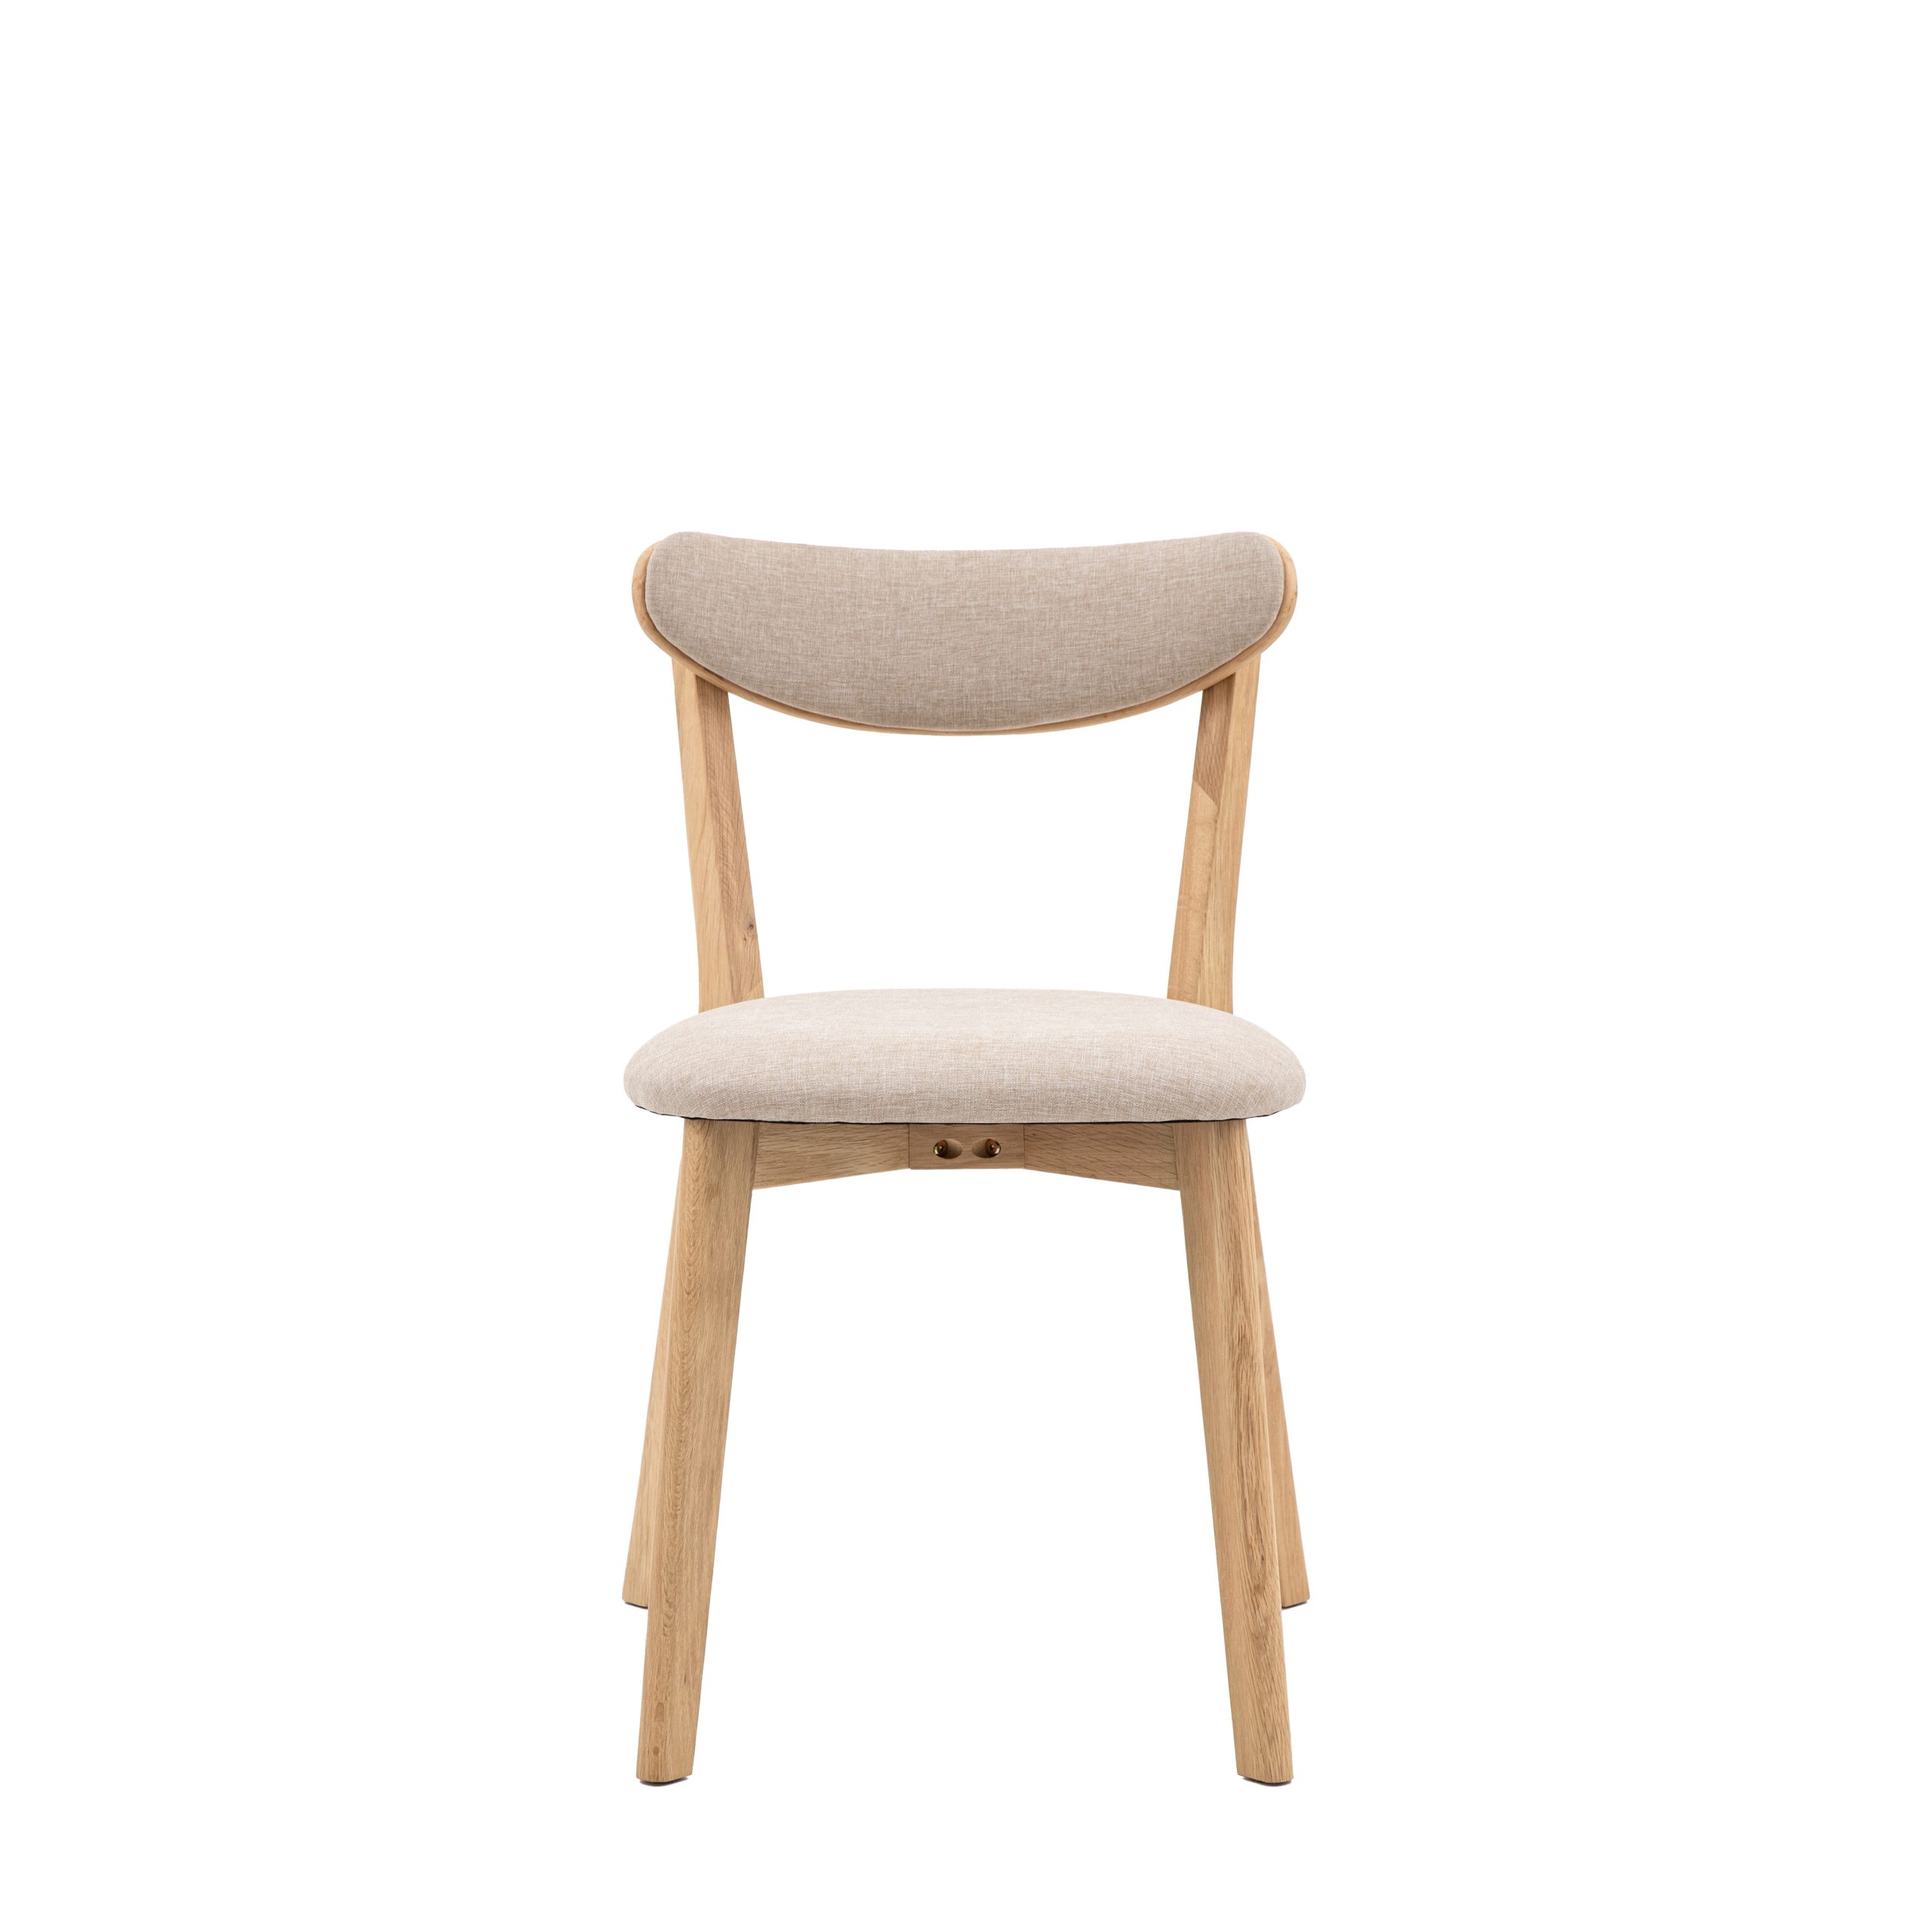 Gallery Direct Hatfield Dining Chair Natural (Set of 2)